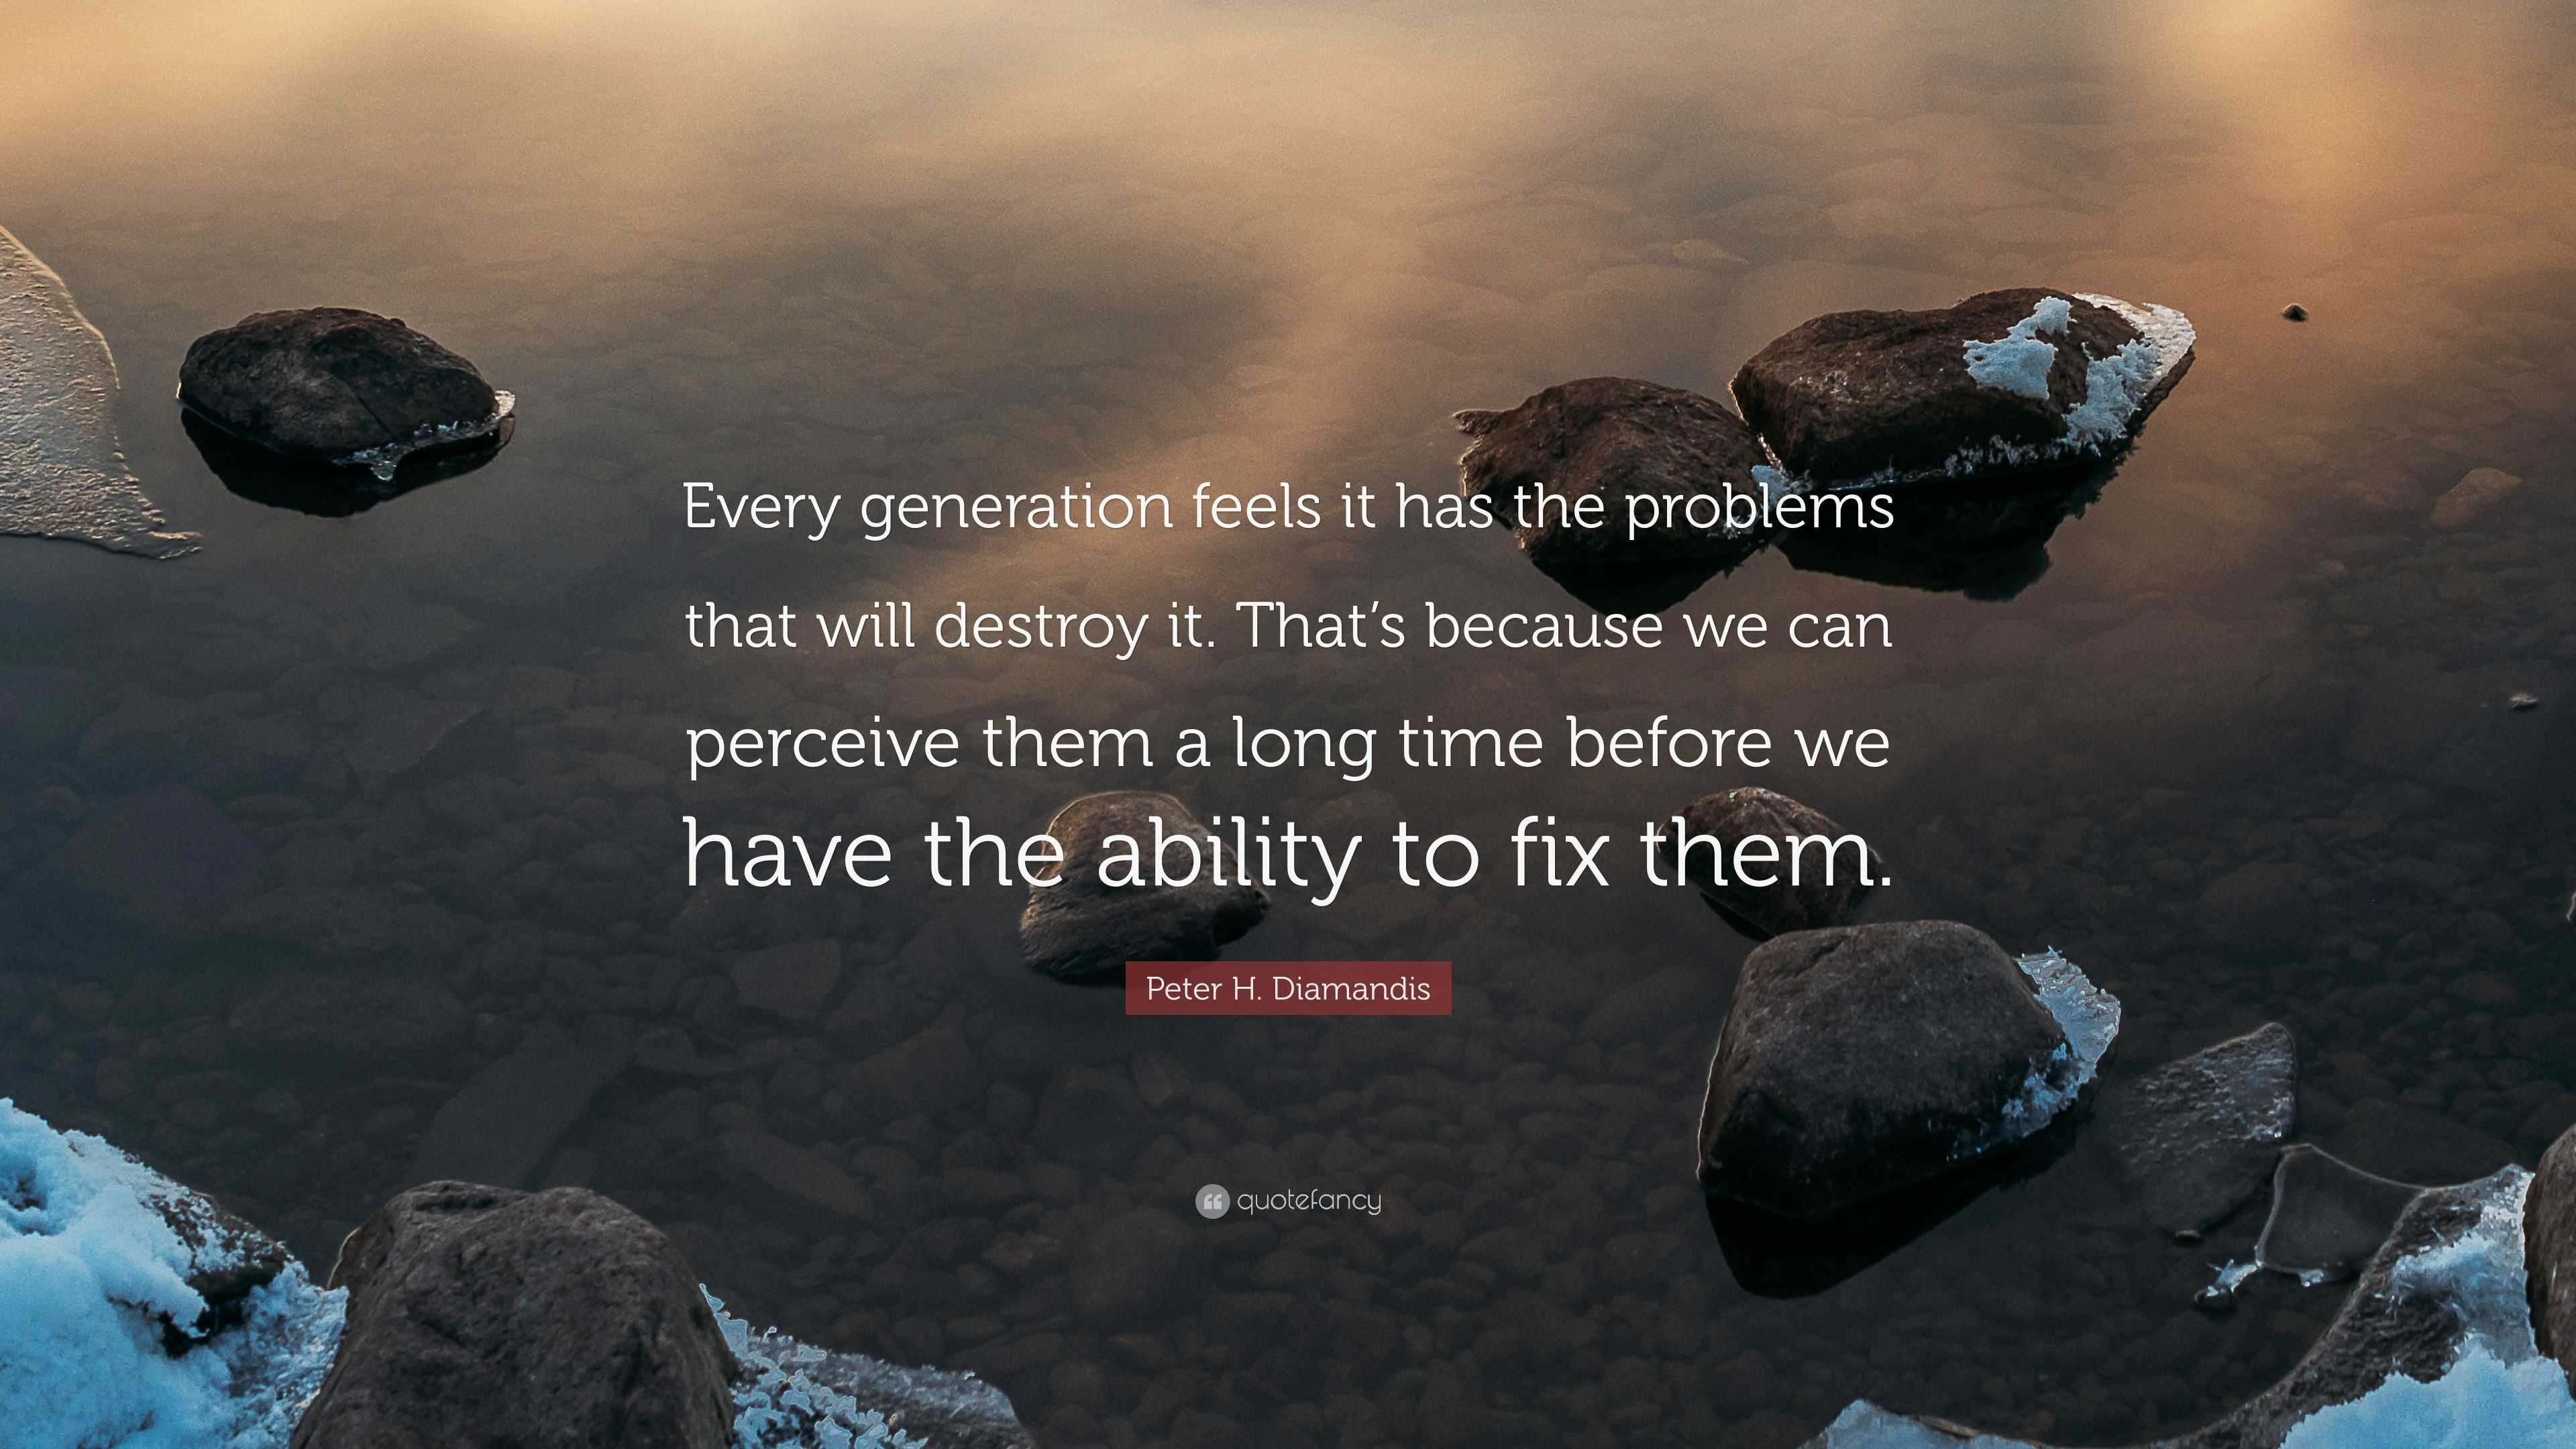 Peter H. Diamandis Quote: “Every generation feels it has the problems that will destroy That's because we can perceive them a long time before ...”